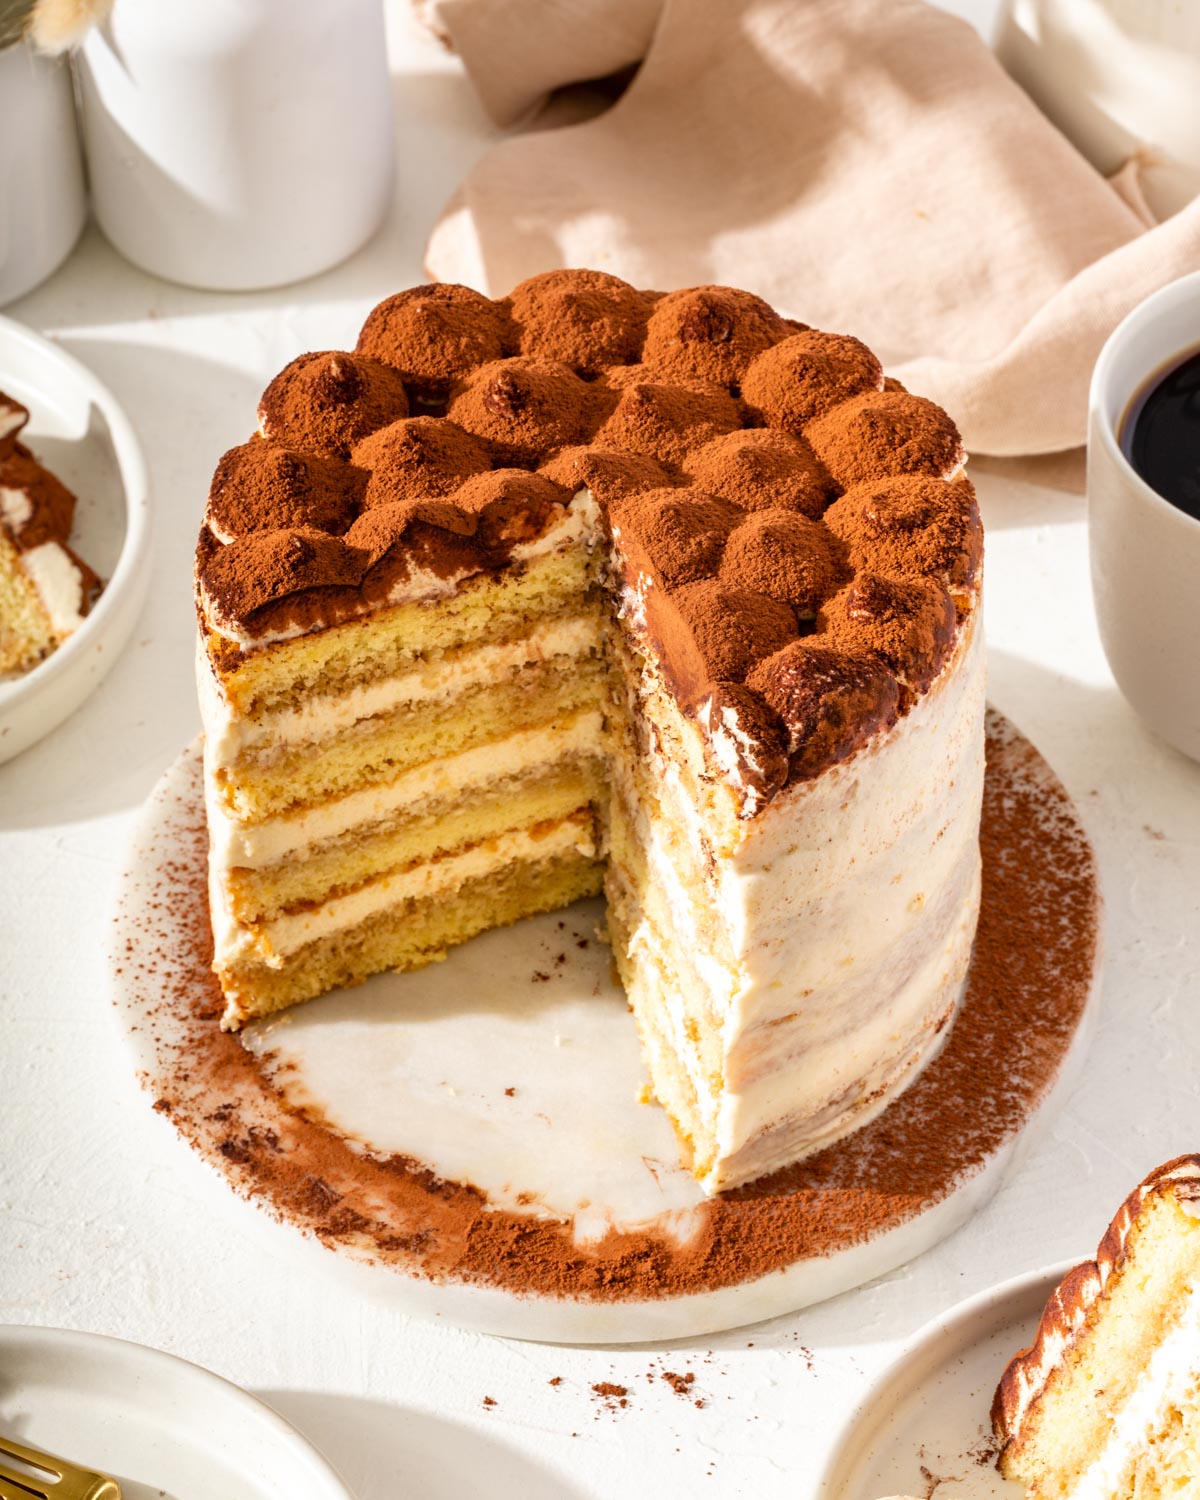 A tiramisu cake with a few slices out of it